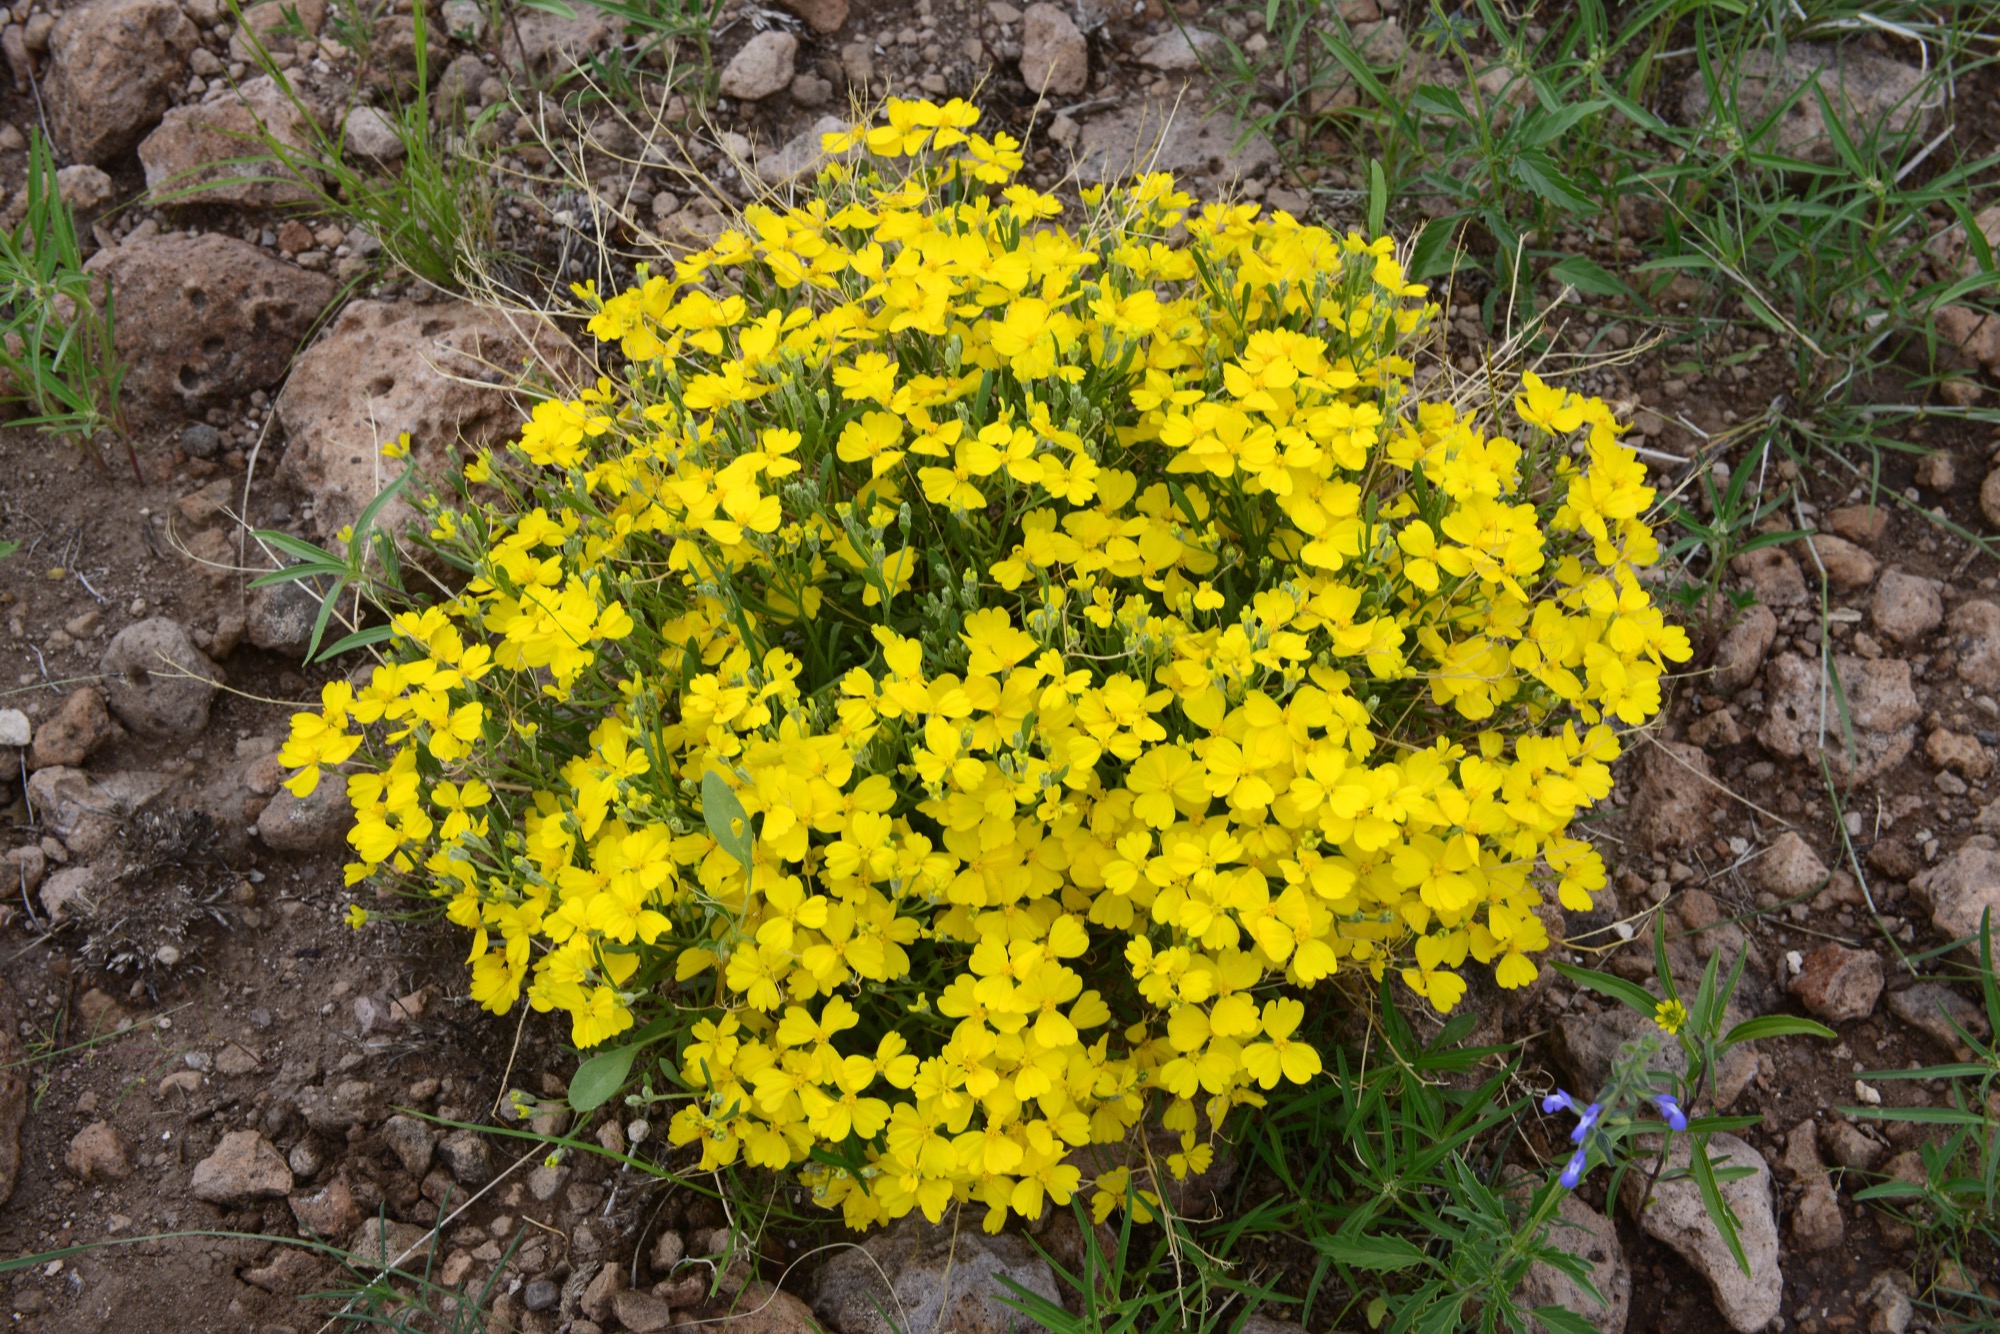 A yellow bunch of wild flowers